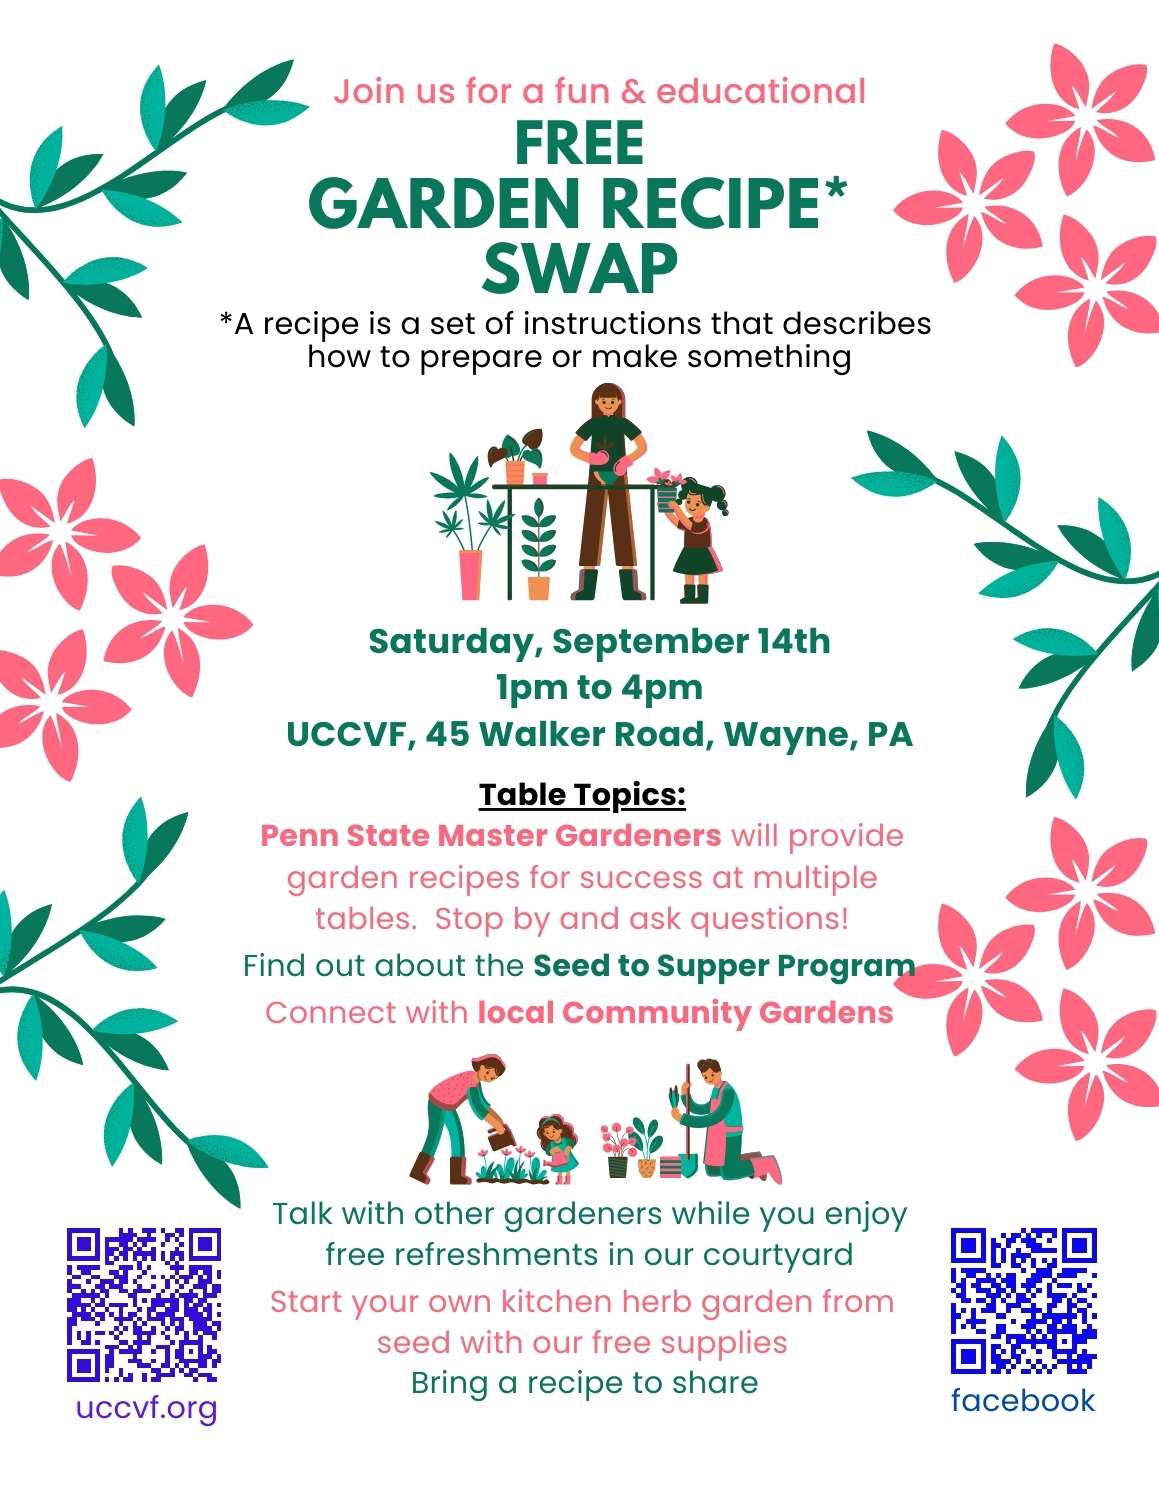 Garden Recipe Swap on Saturday, September 14th, 1pm to 4pm